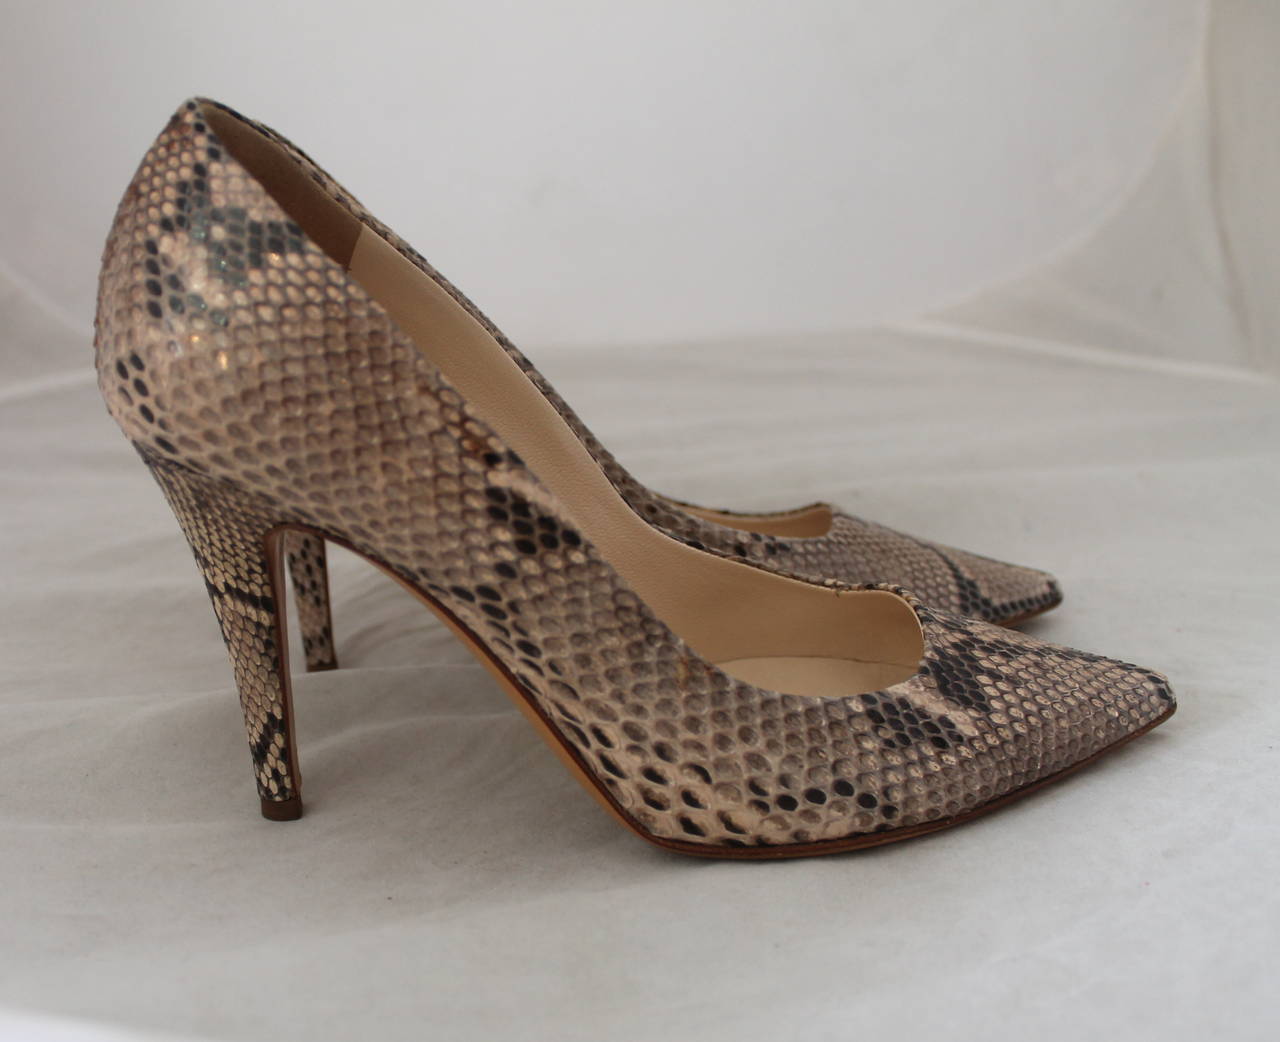 Valentino Python Pointed Toe Pumps - 36. These shoes are in very good condition with minor wear on the bottom.